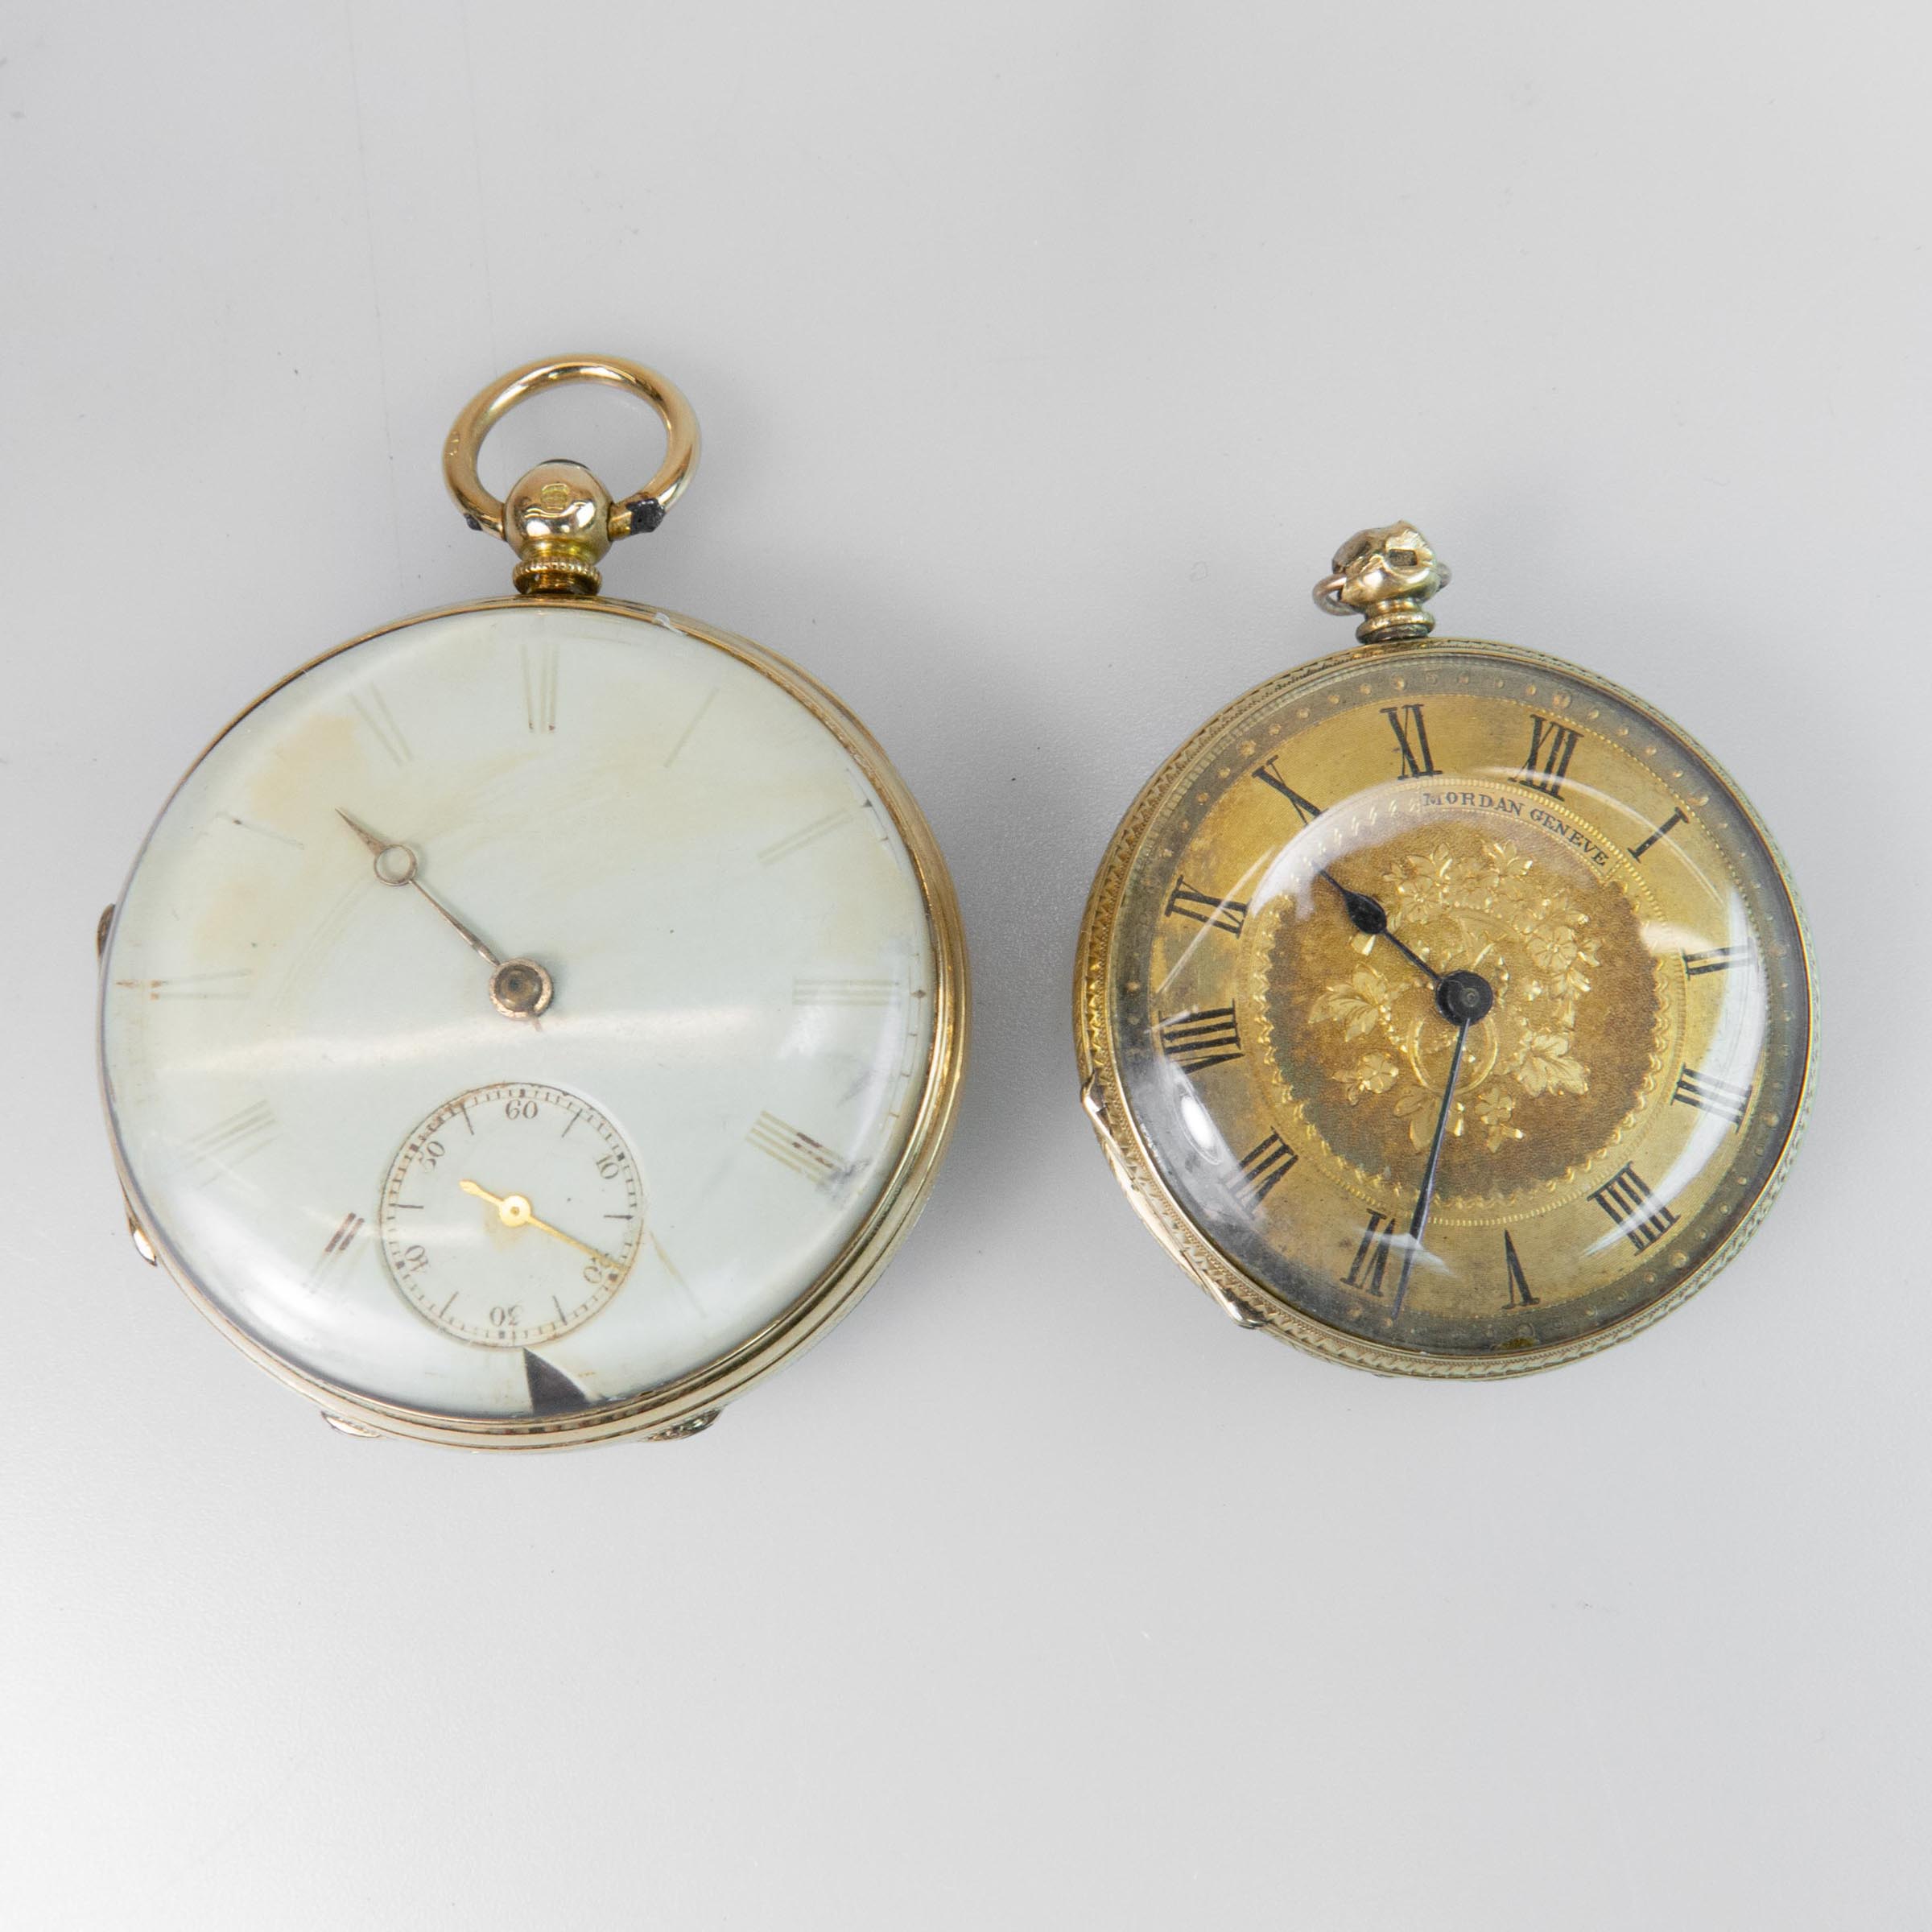 Two Openface, Key Wind Pocket Watches In 18k Yellow Gold Cases